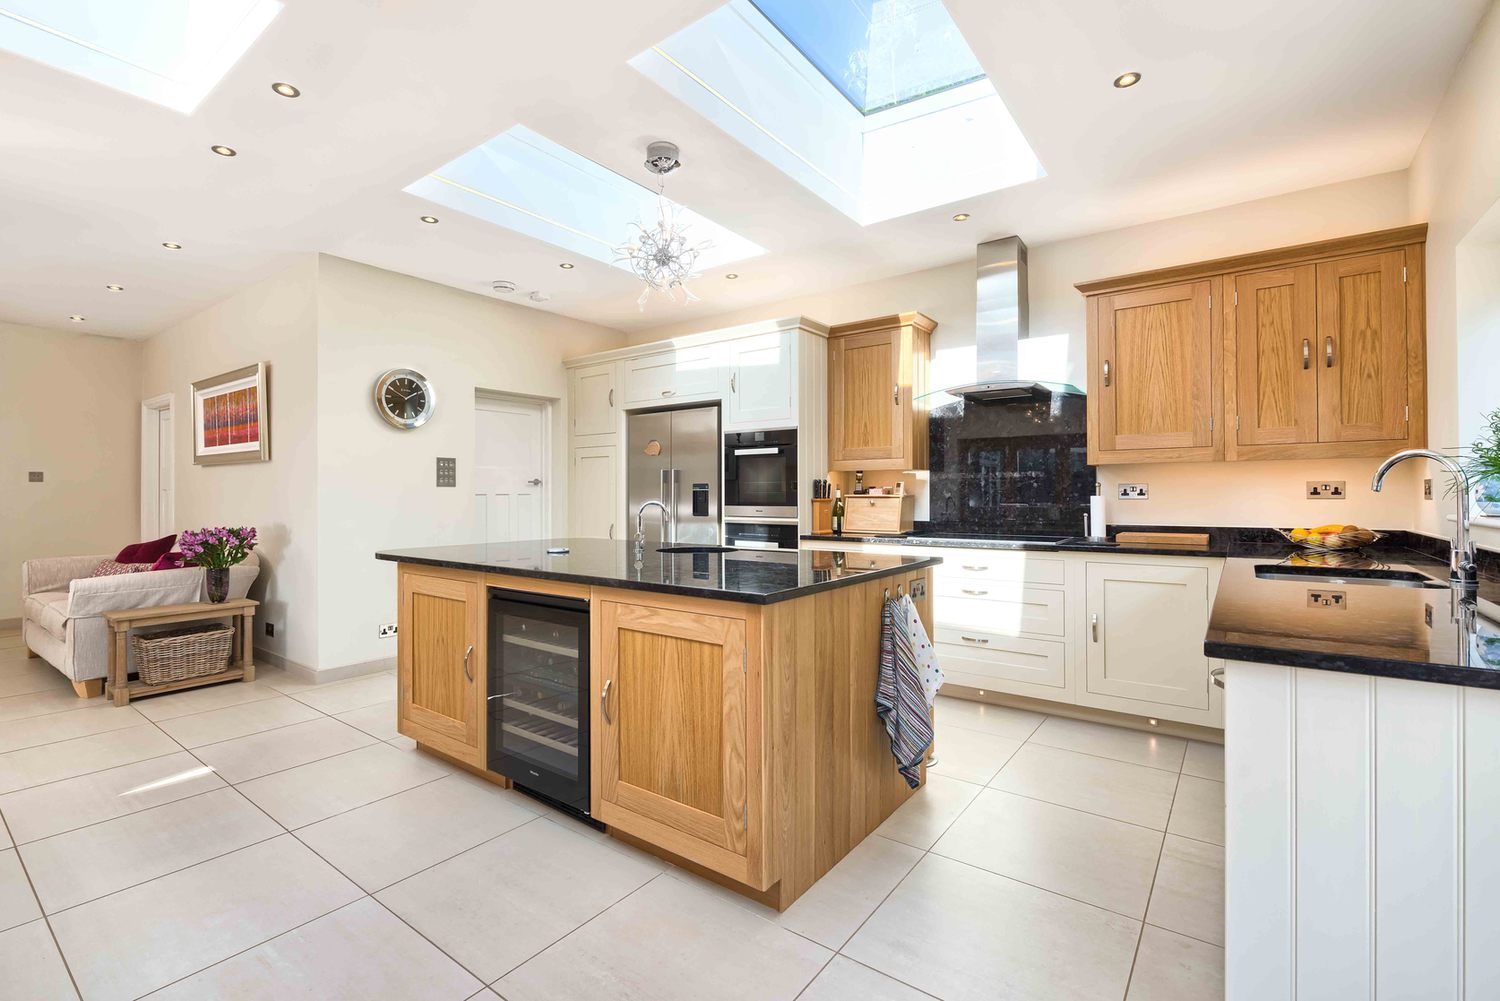 A kitchen with lots of light from a modern house extension by Harvey Norman Architects St Albans